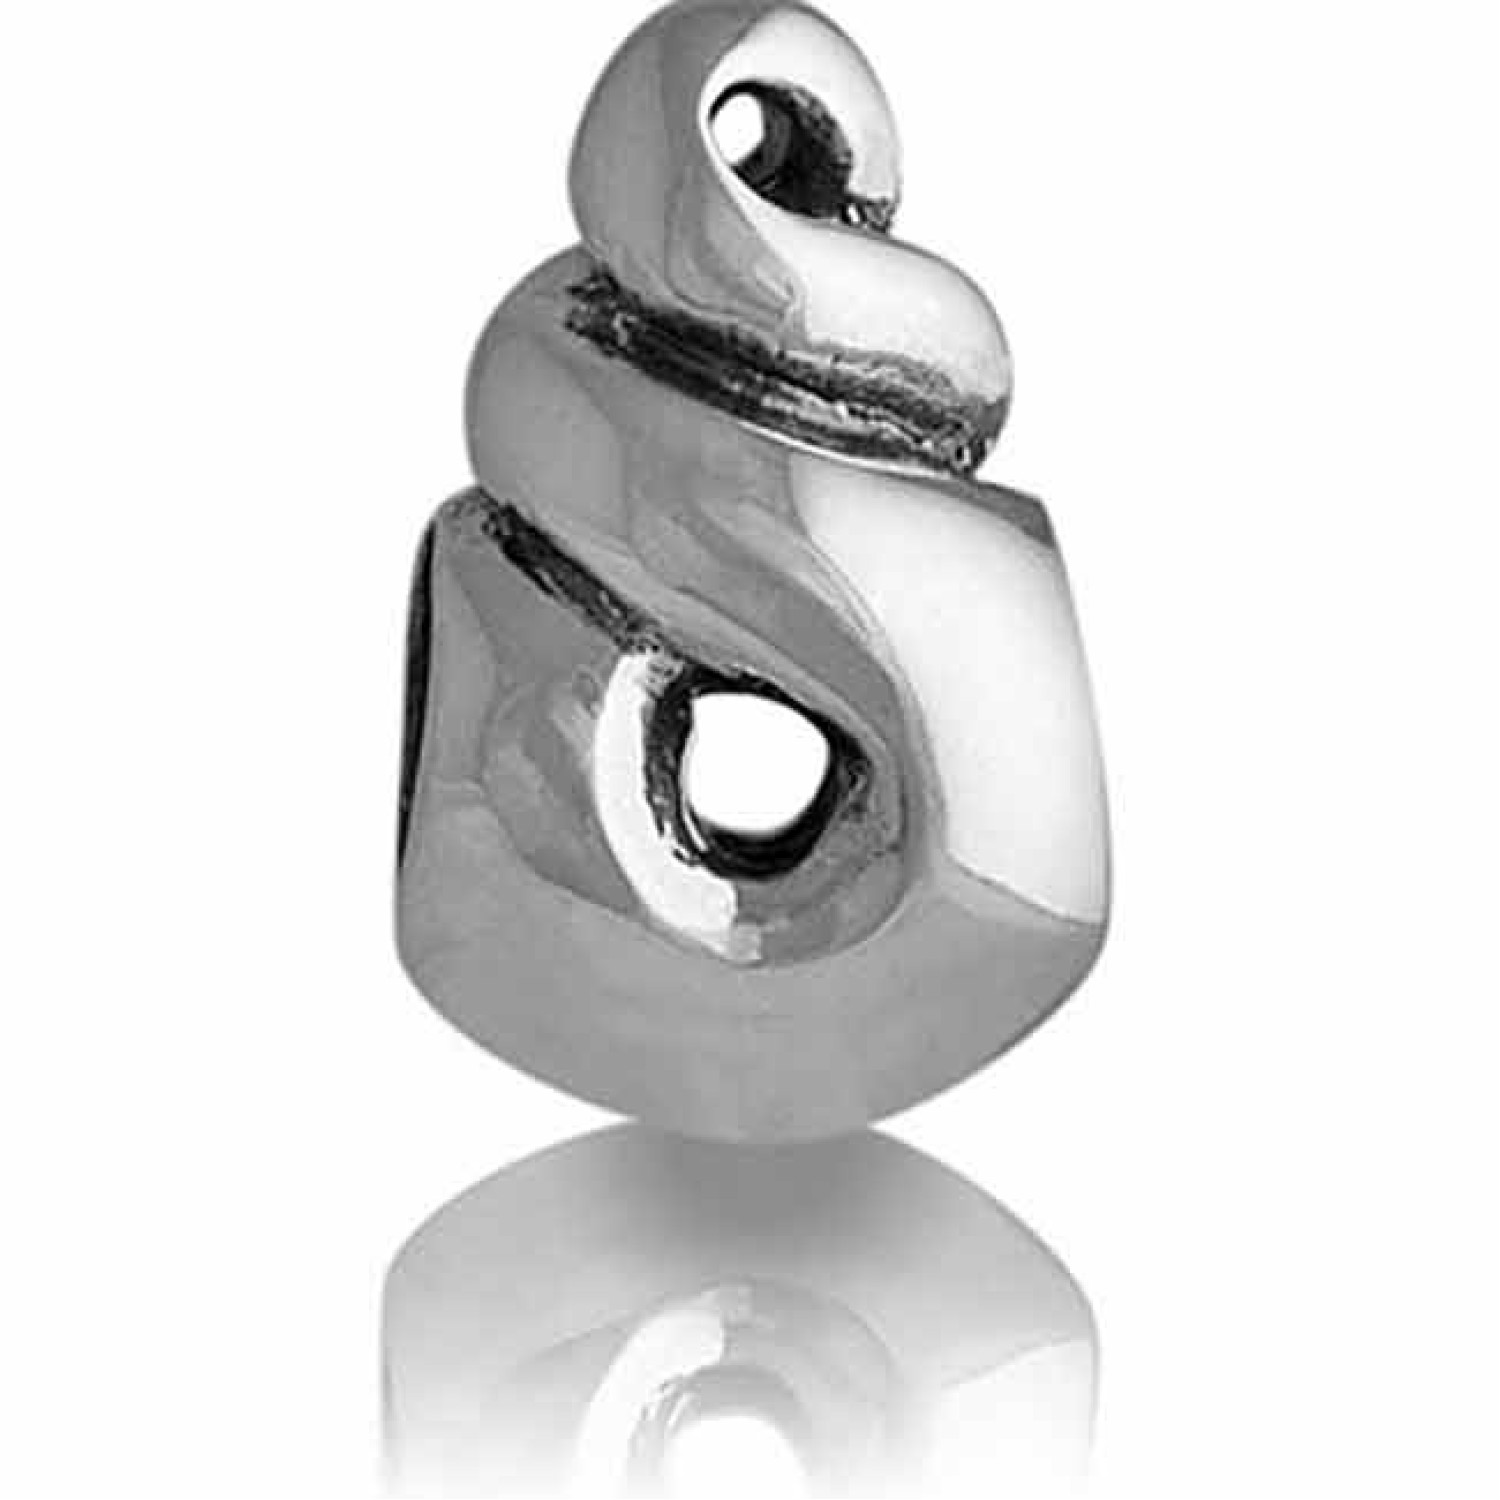 LK004 Evolve Charm NZ Eternity and Friendship. Evolve Charm New Zealand Eternity and Friendship Jewellery The Evolve twist charm symbolises the most special of attributes - loyalty. This distinctive Evolve charm honours those friendships or relationships 